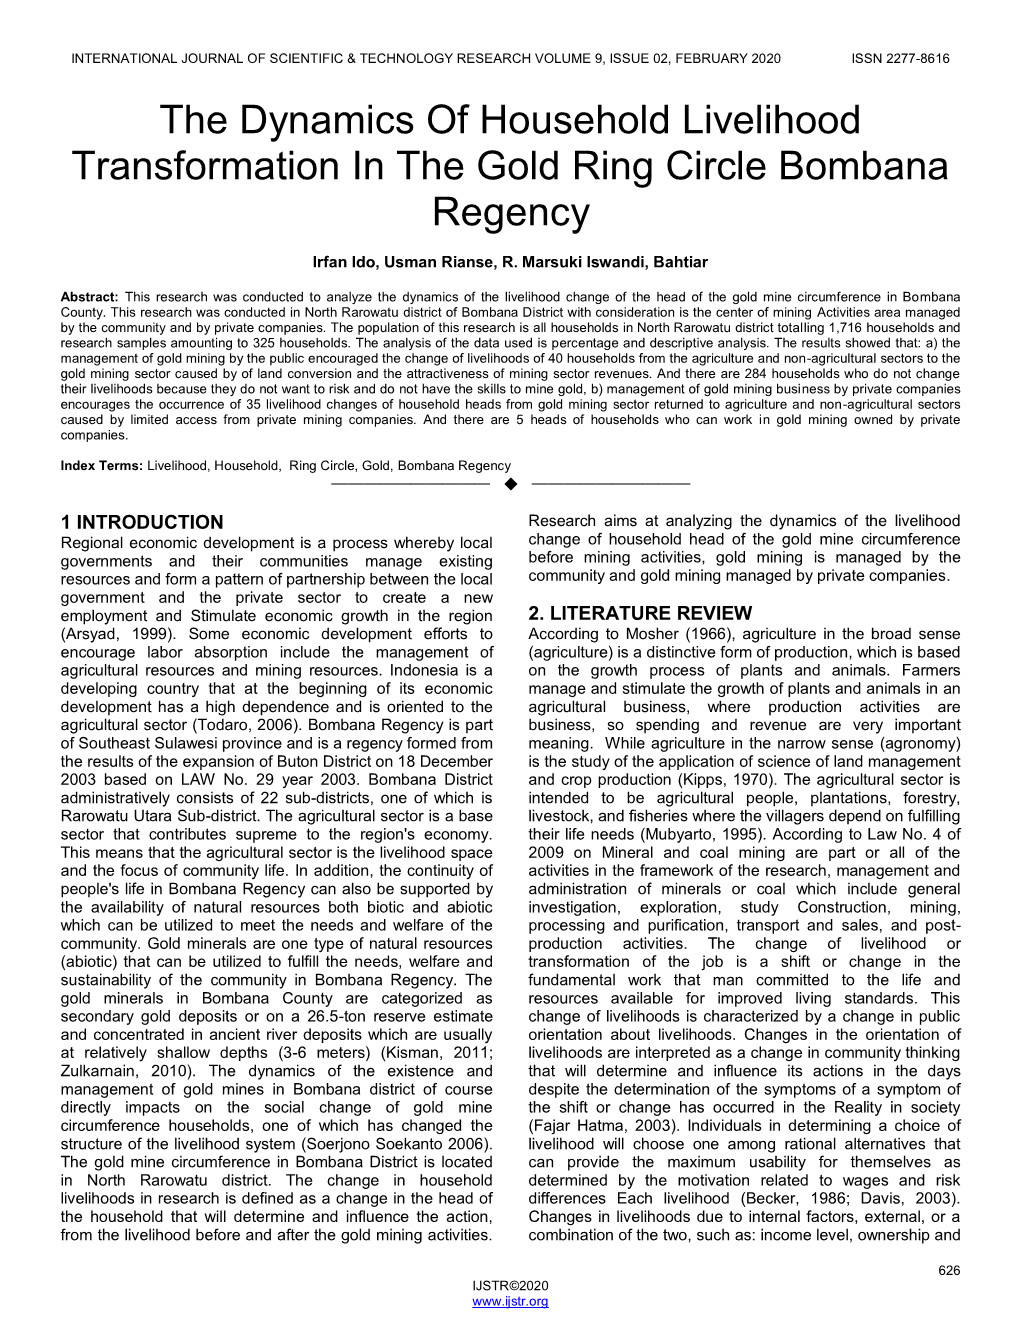 The Dynamics of Household Livelihood Transformation in the Gold Ring Circle Bombana Regency